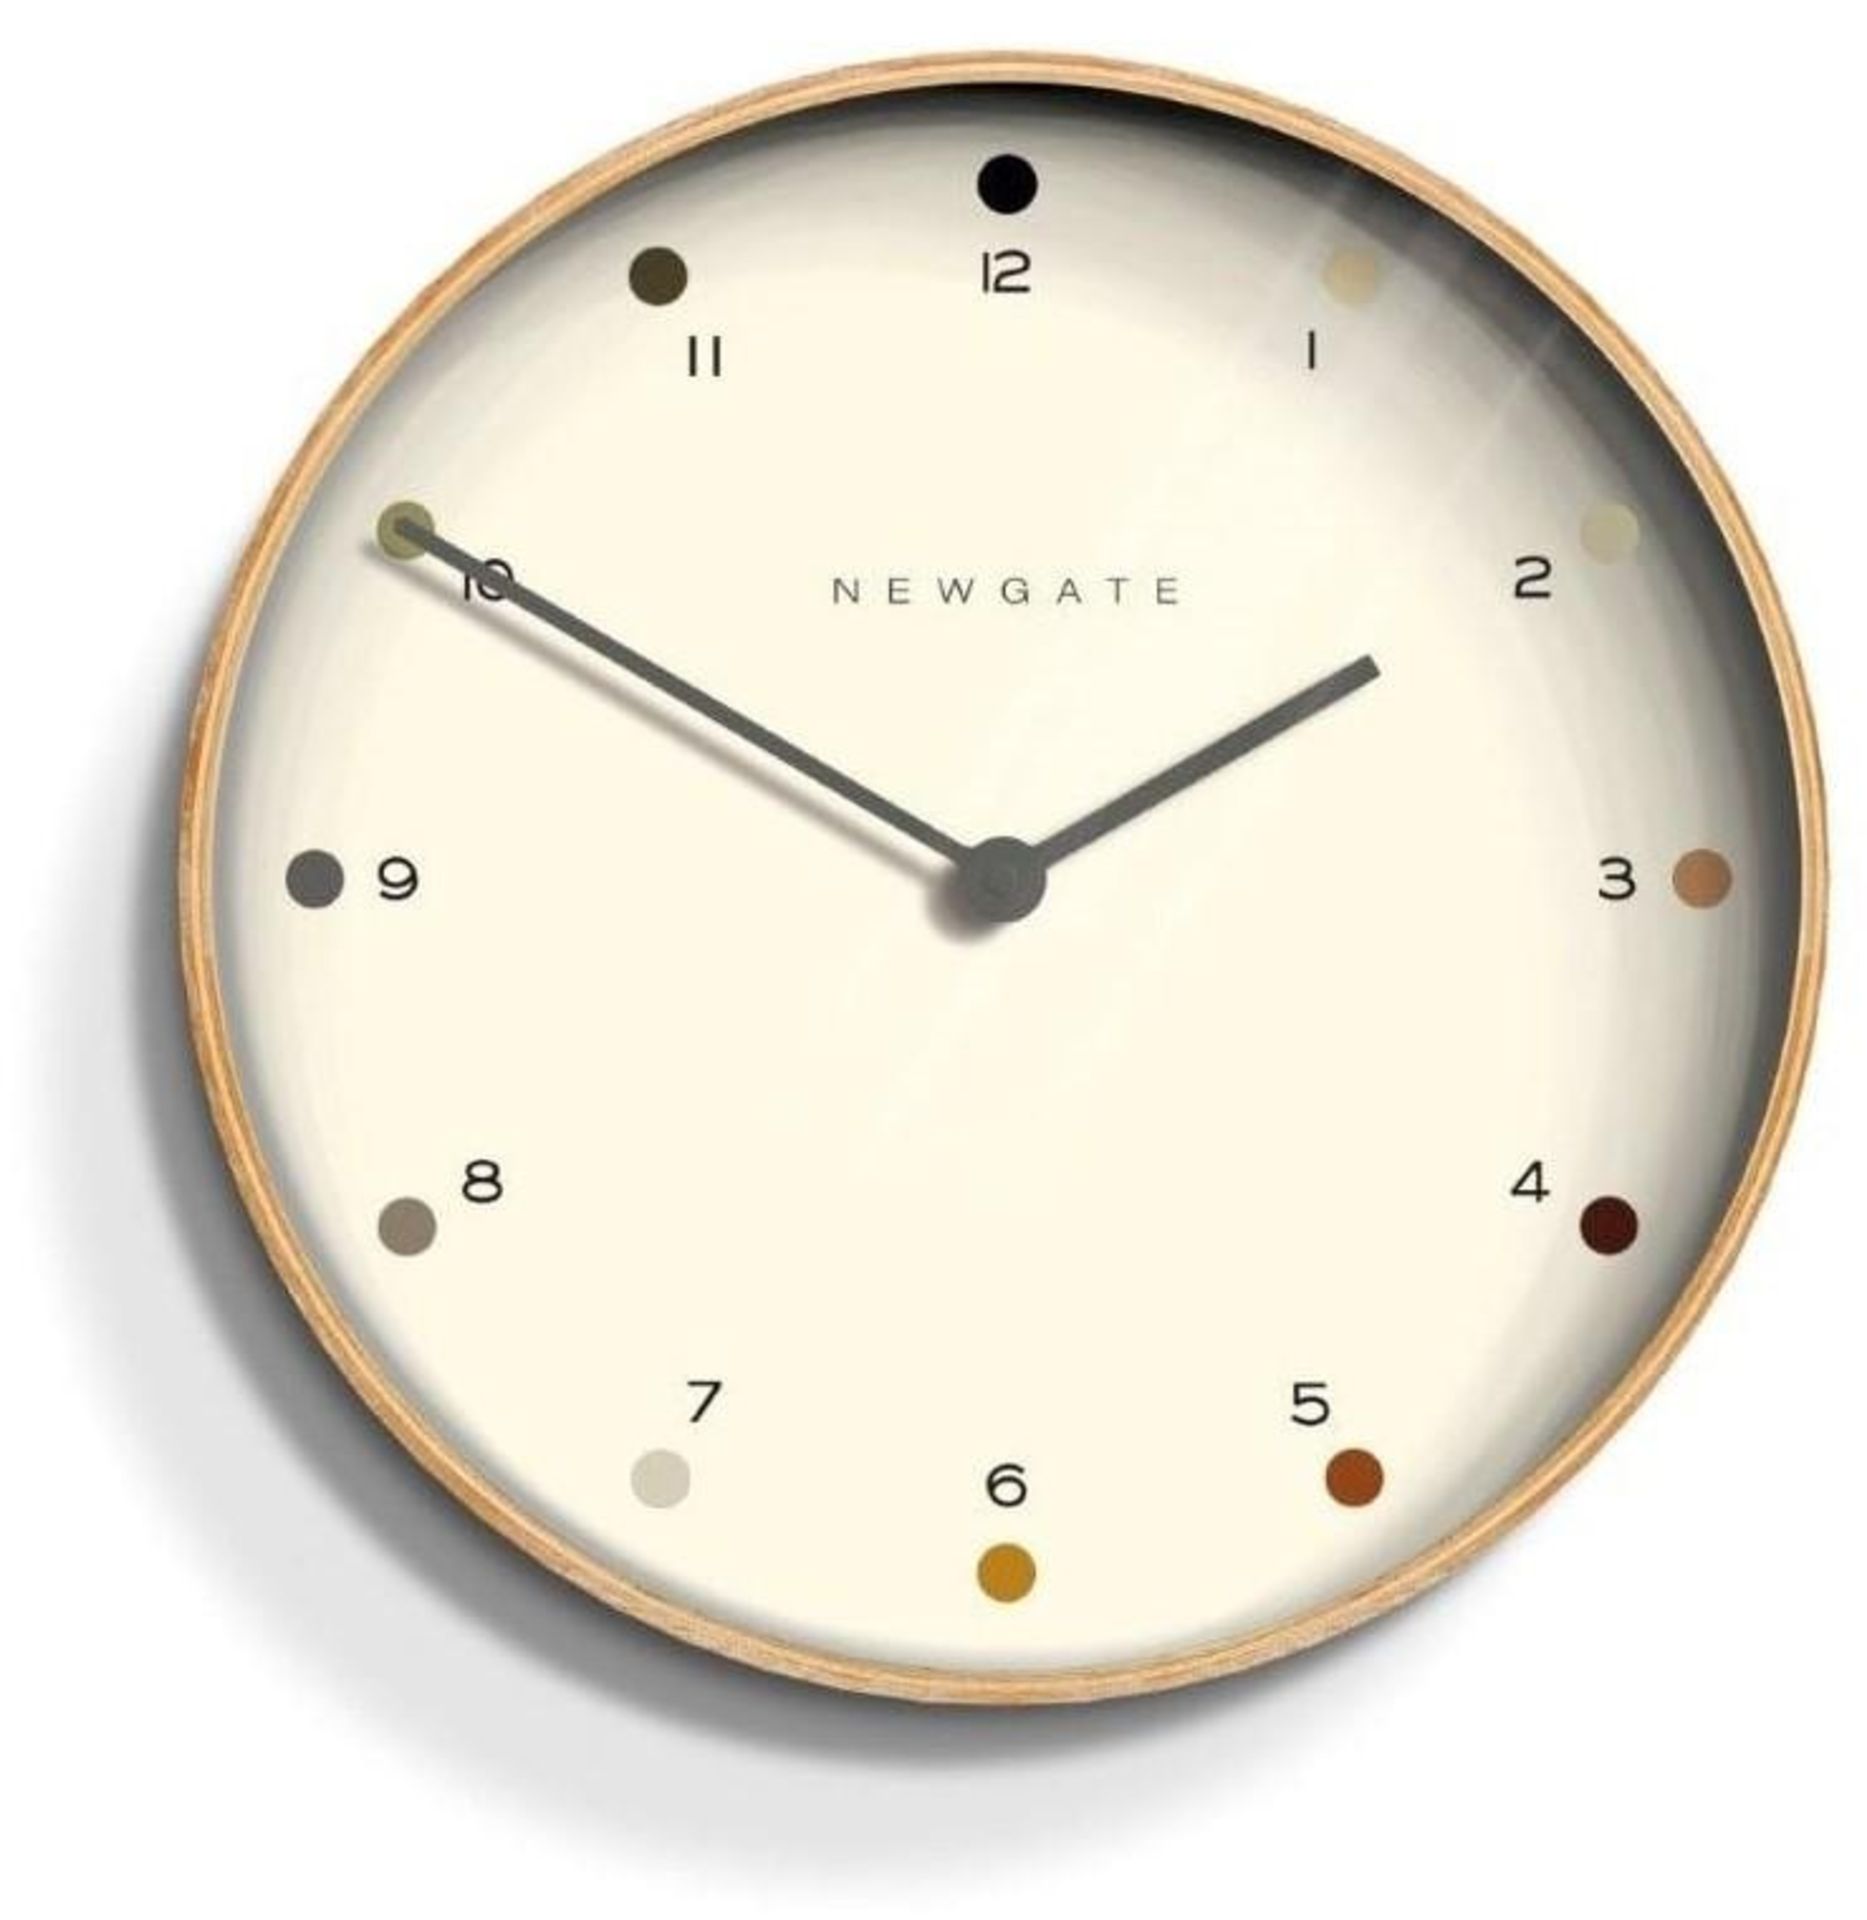 1 x Mr Clarke Scandanavian-style Light Plywood Wall Clock - Dimensions: 28cm in diameter and 4.3cm